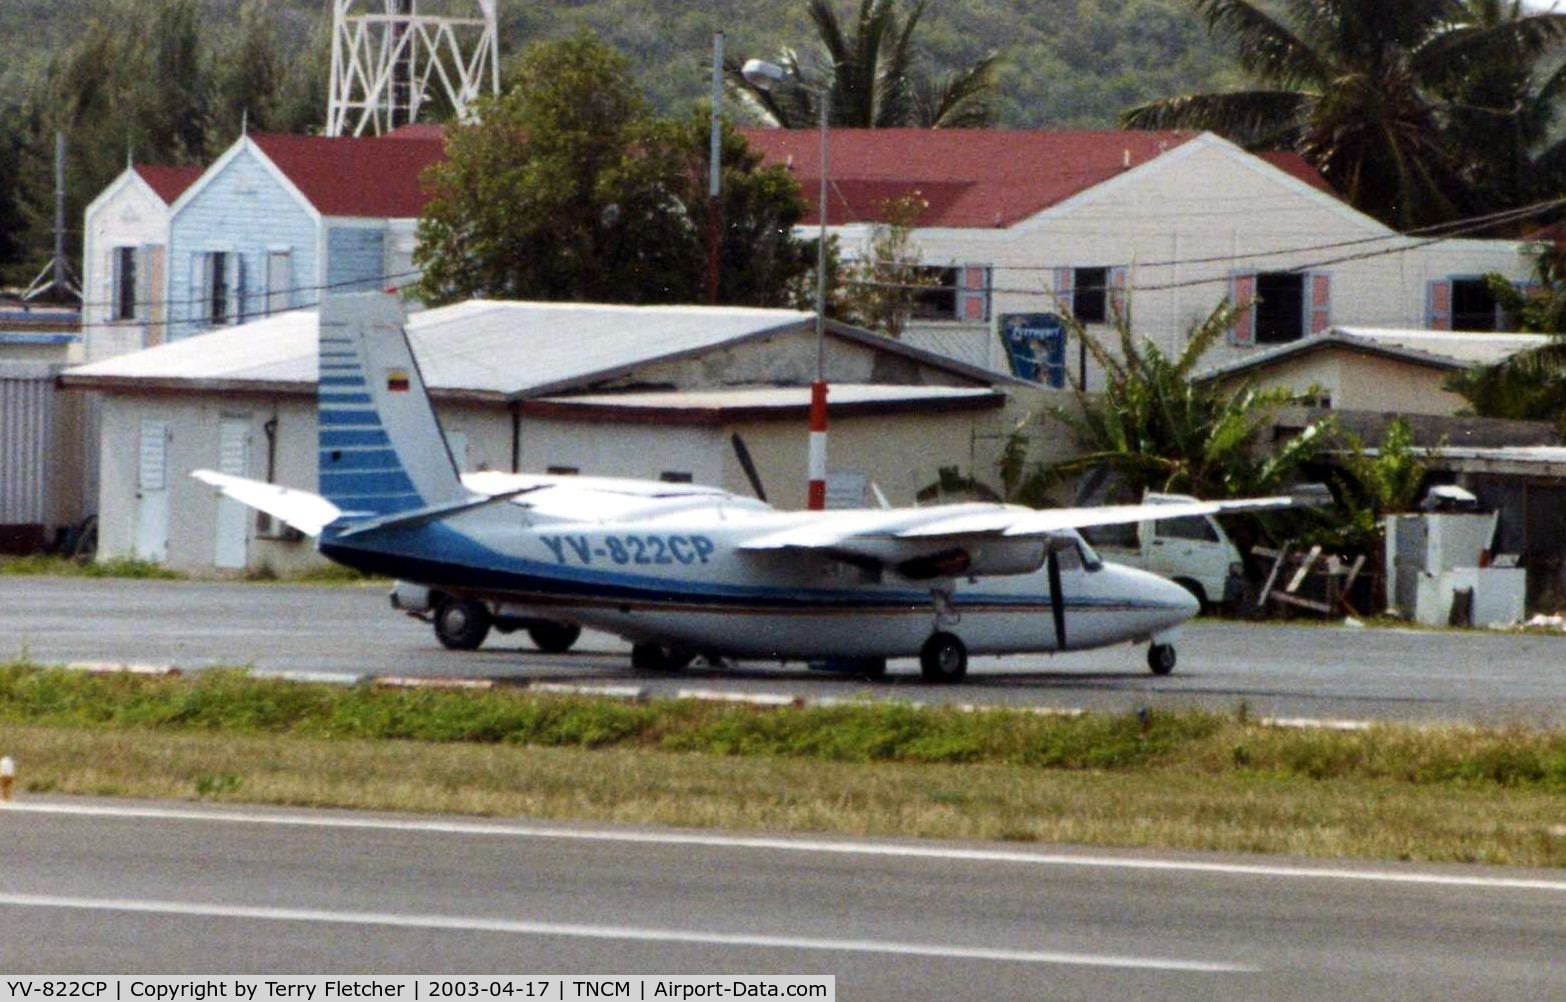 YV-822CP, 1983 Rockwell 690D Turbo Commander C/N 15030, This Gulfstream Commander 690D cn 15030 was photographed on the St.Maarten ramp in 2003